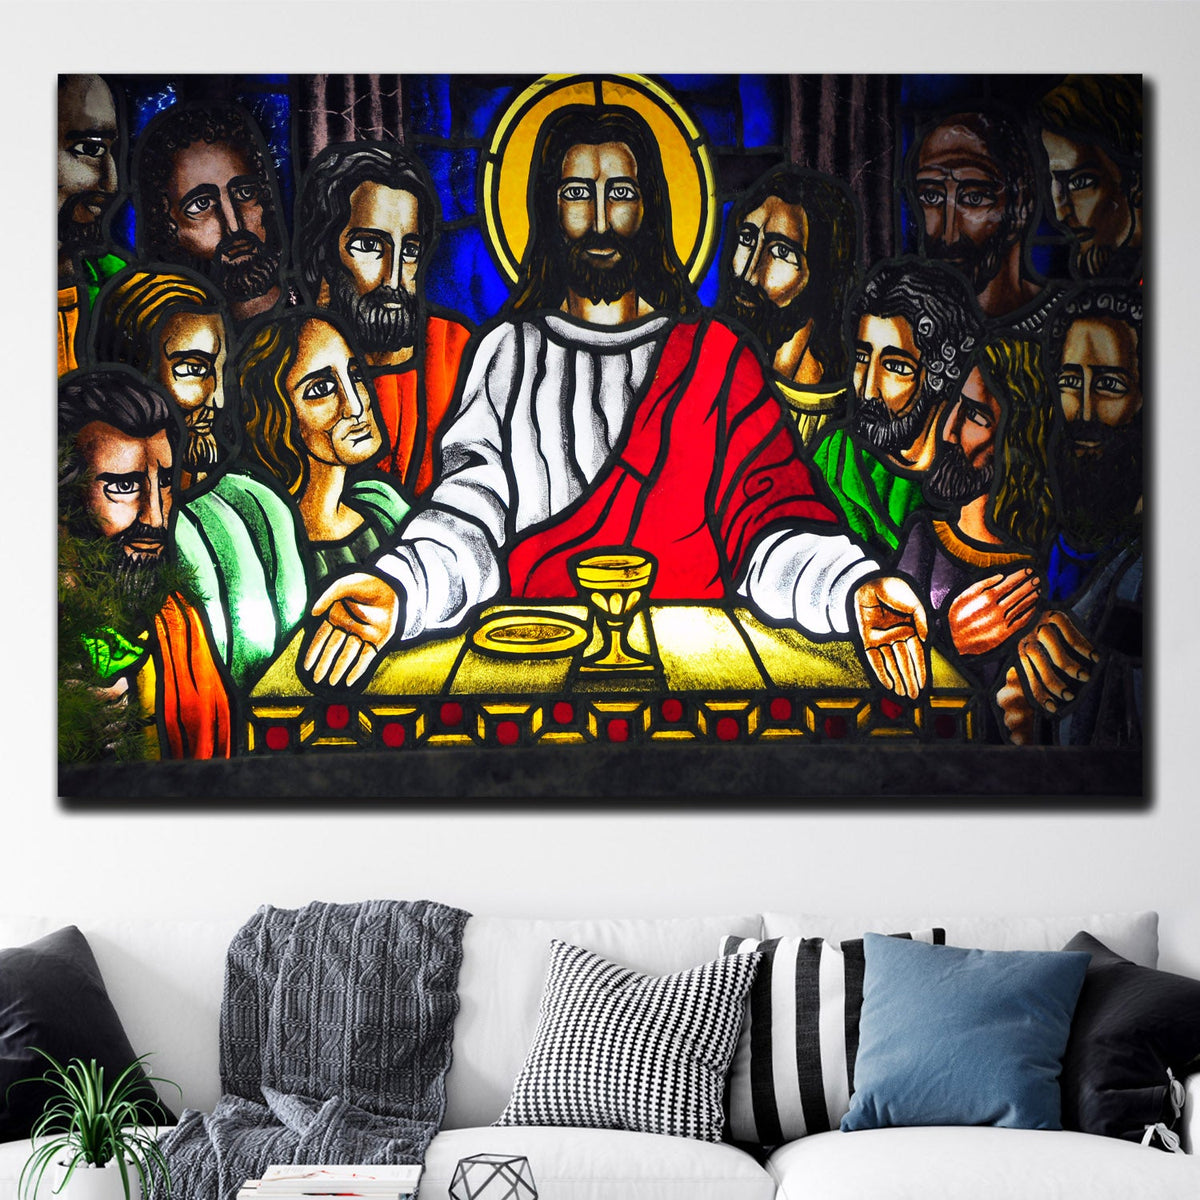 https://cdn.shopify.com/s/files/1/0387/9986/8044/products/TheLastSupperMosaicCanvasArtprintStretched-4.jpg